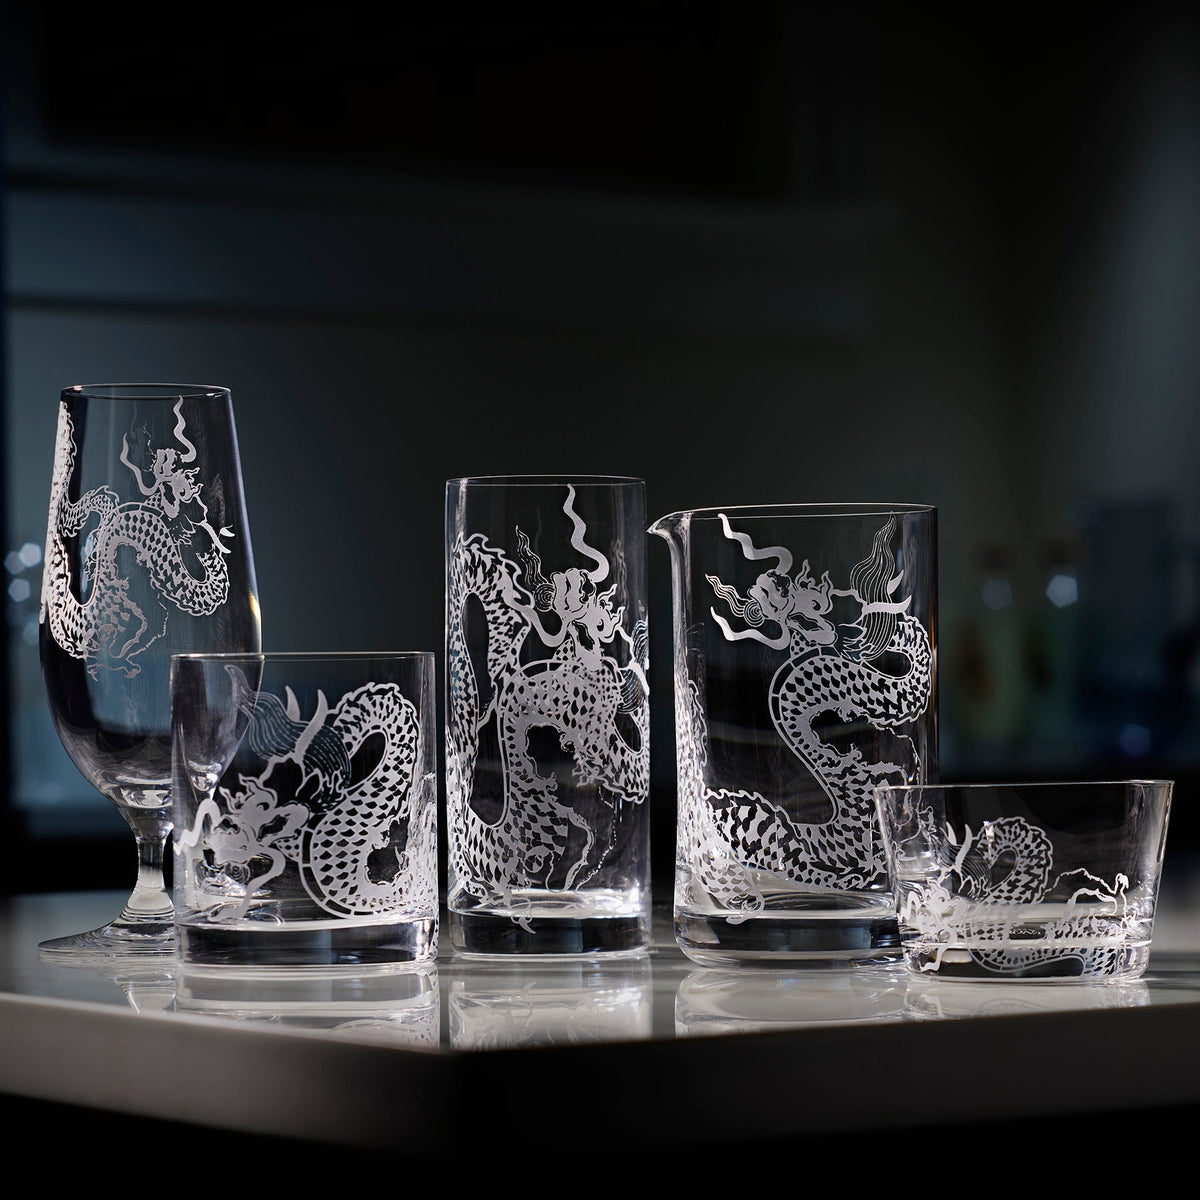 The sand etched dragon collection by Caskata includes a beer glass, tumbler, highball, mixing glass and tidbit bowls.